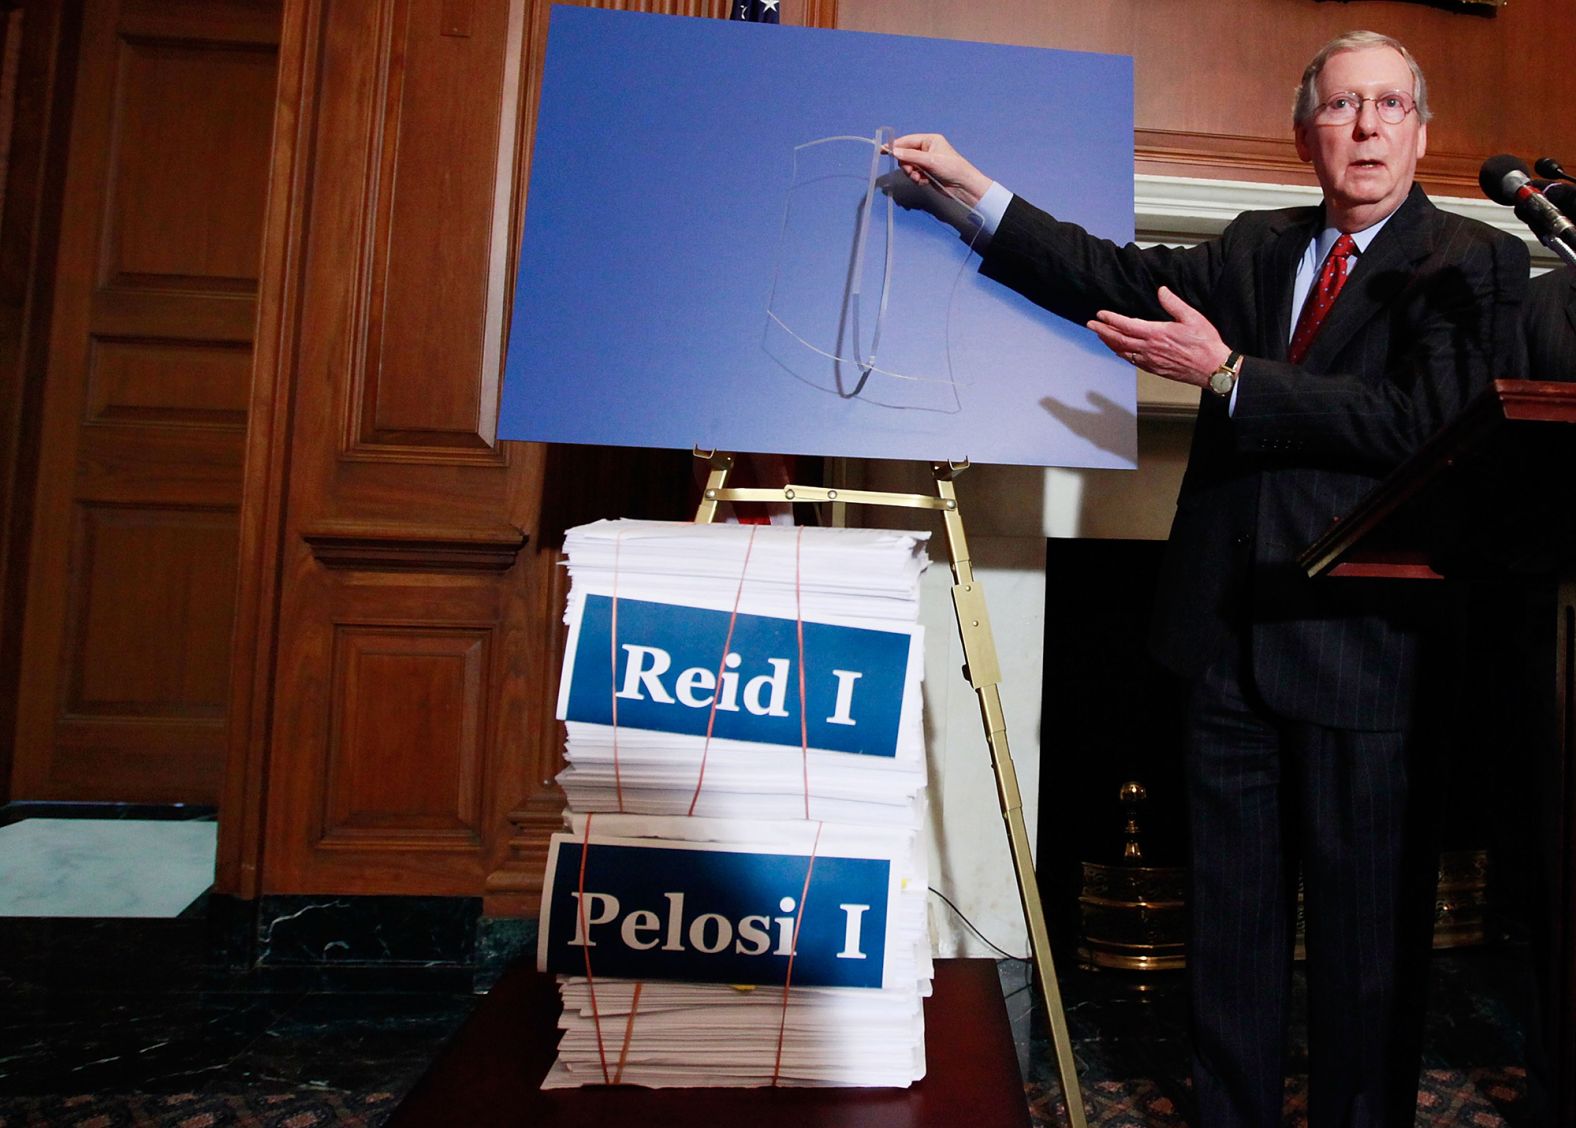 McConnell holds an empty binder strap while speaking about health-care reform on Capitol Hill in December 2009. McConnell and Sen. John McCain said that Republicans senators would do everything they could to delay passage of any health-care legislation.